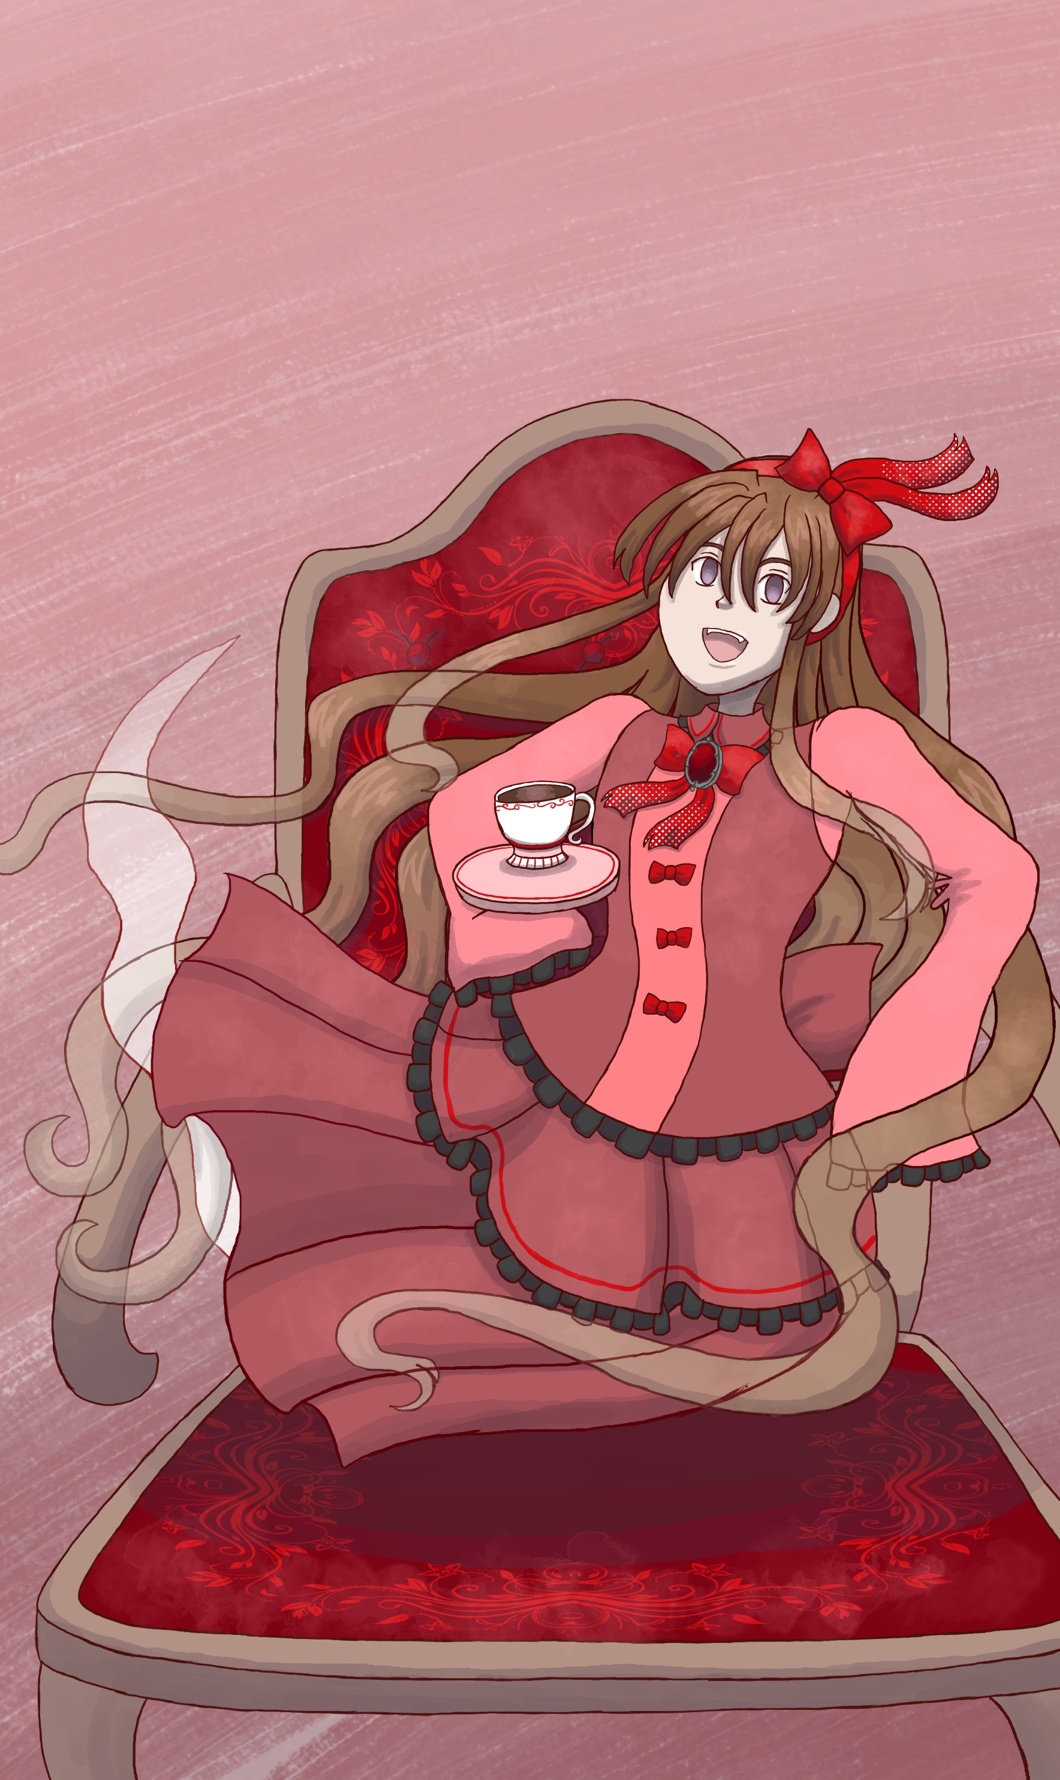 Image description: A watercolor-style digital drawing of a ghostly woman with long flowing brown hair that is lighter and  faded towards the ends. She wears a Victorian-style red dress with bright red bows and ribbons, and she is reclining on a wooden chair while she levitates a saucer and a cup of tea in one hand.